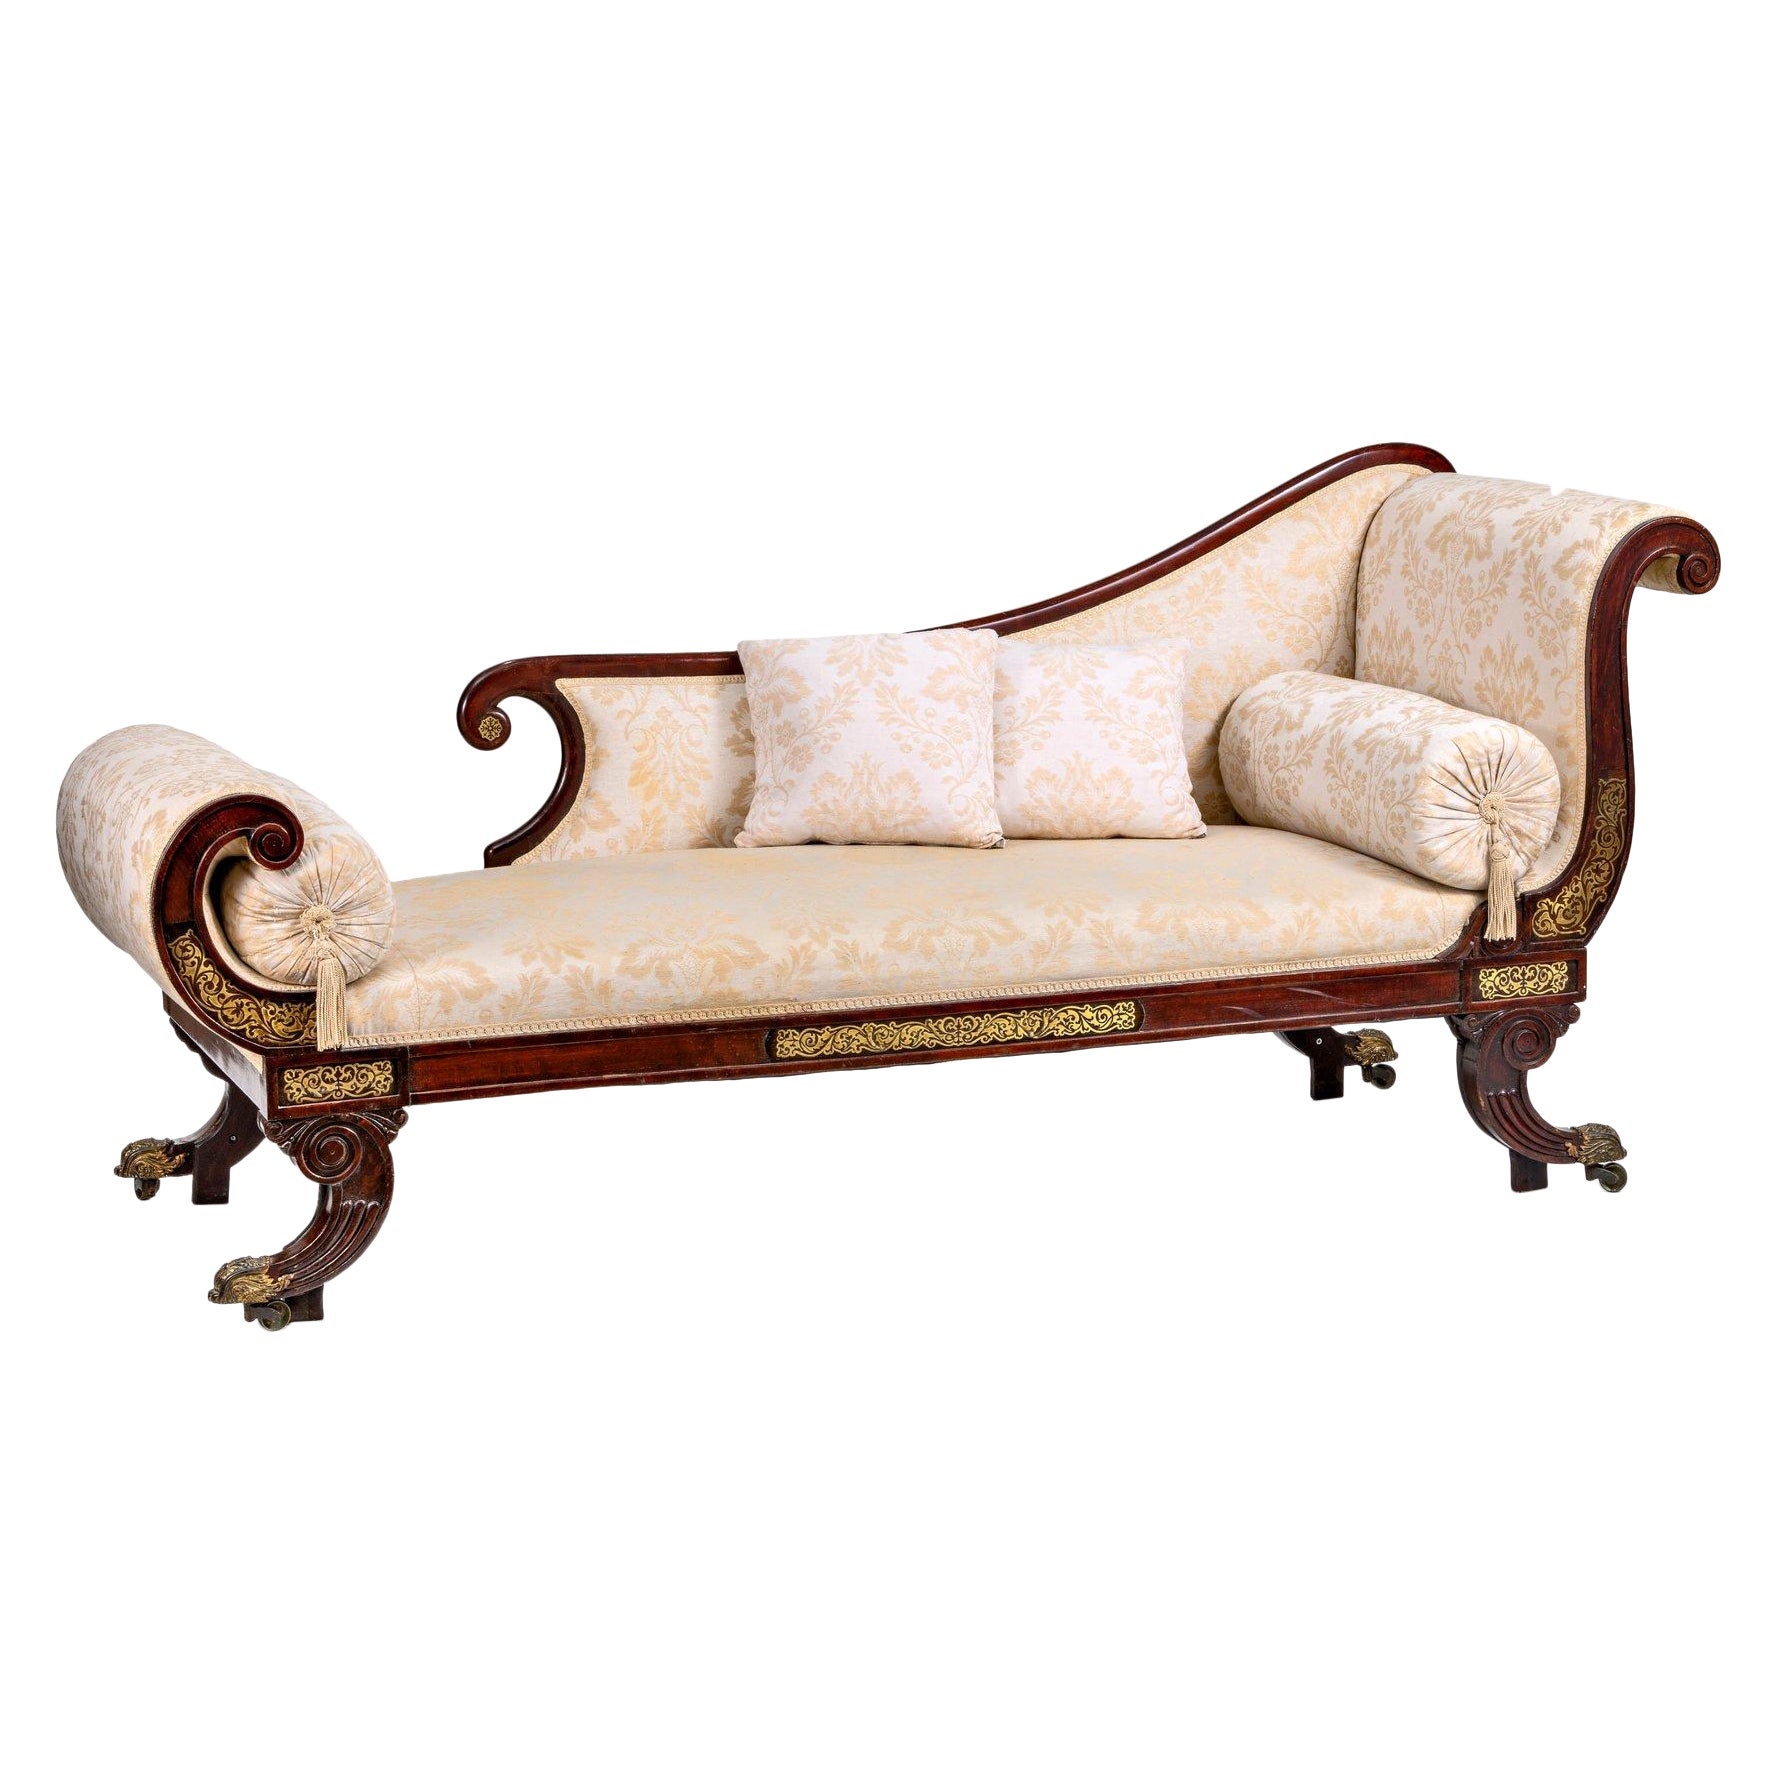 Is a chaise longue comfortable?